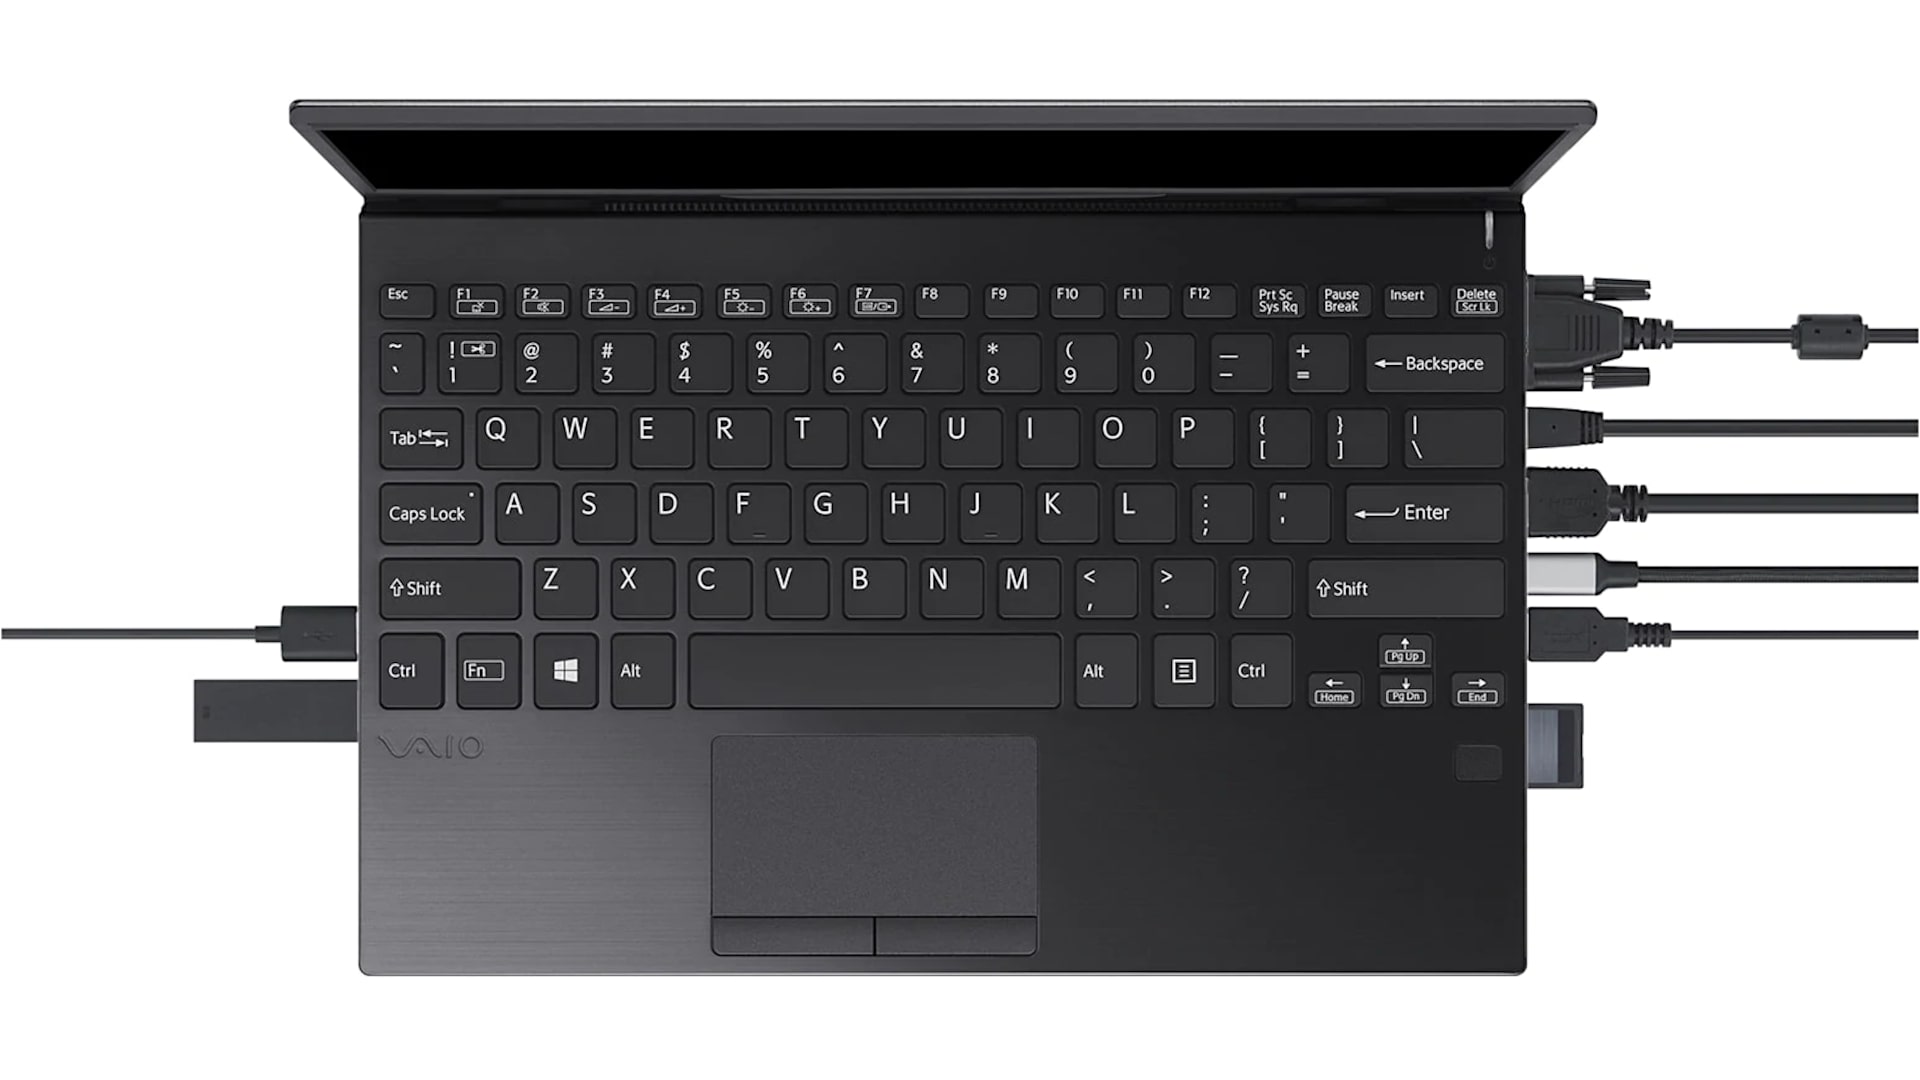 VAIO SX12 2019 Keyboard and Connections